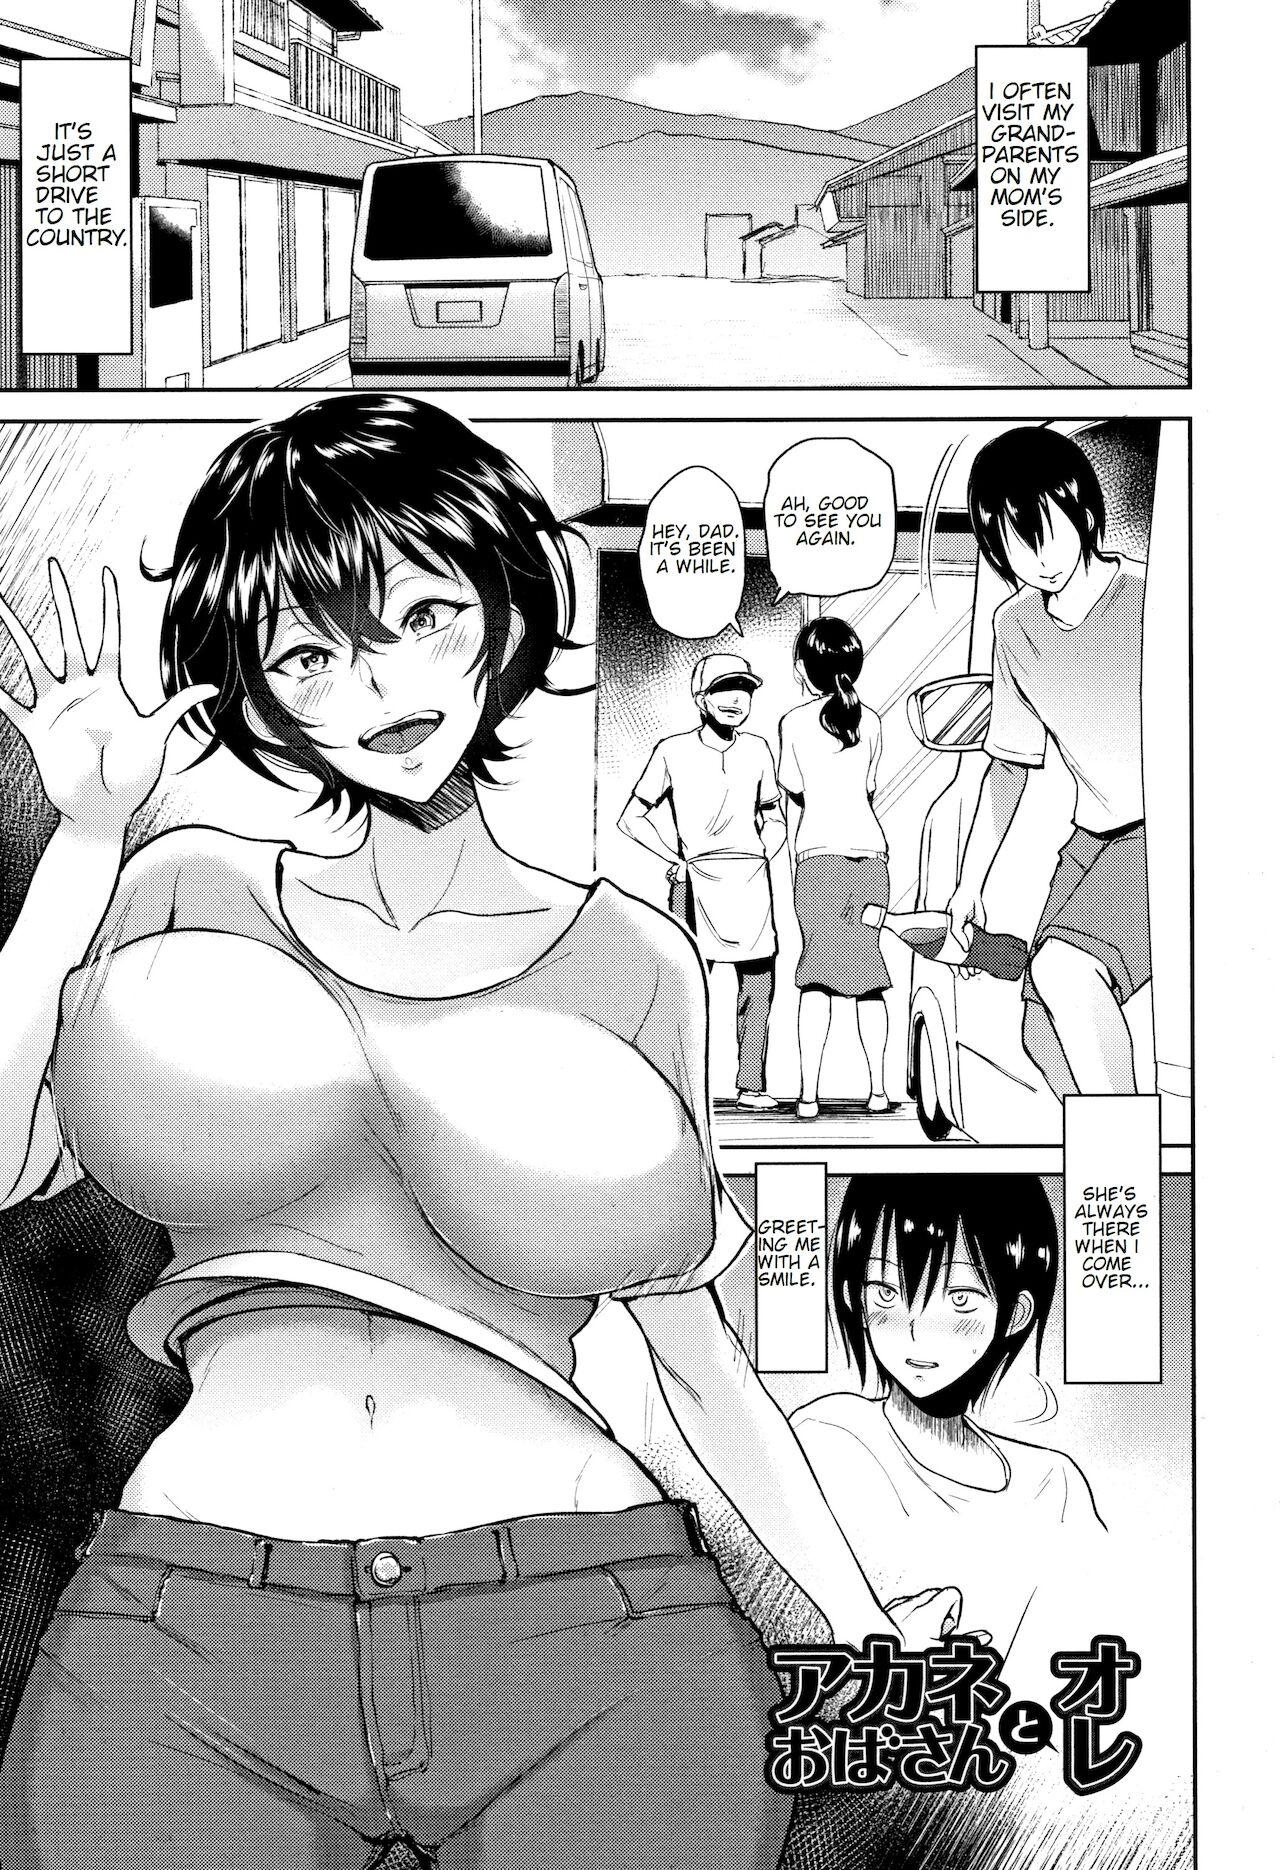 Gostosas Akane Oba-san to Ore | Aunt Akane and I Gay Physicals - Page 7